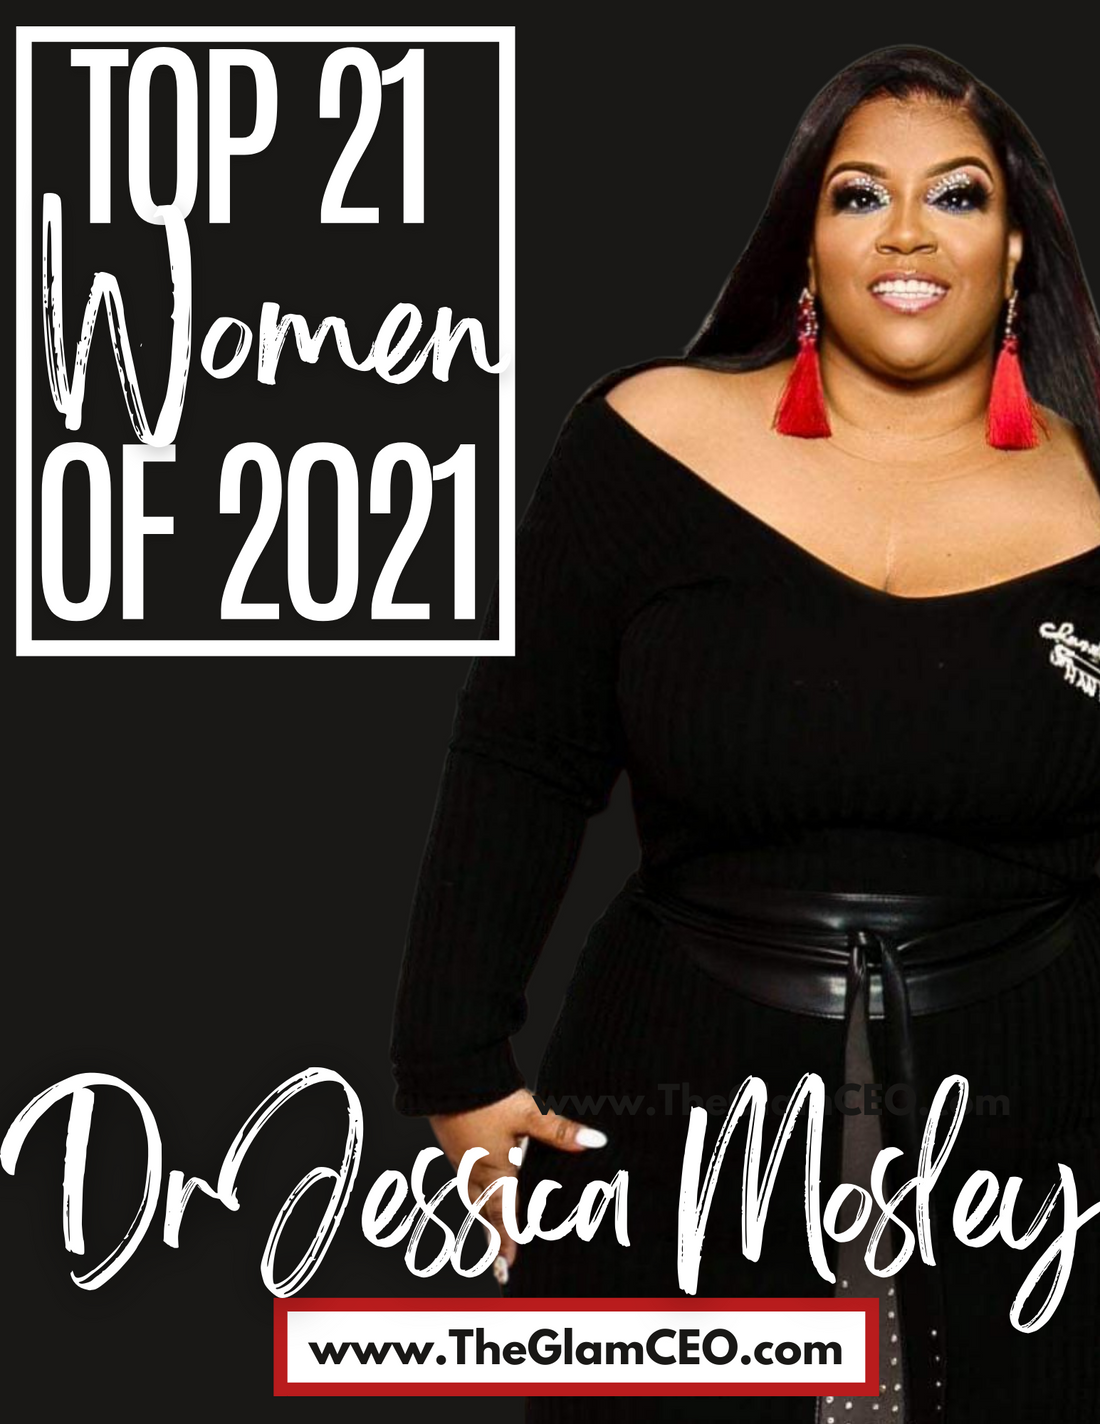 Top 21 Women of 2021: Dr. Jessica Mosley